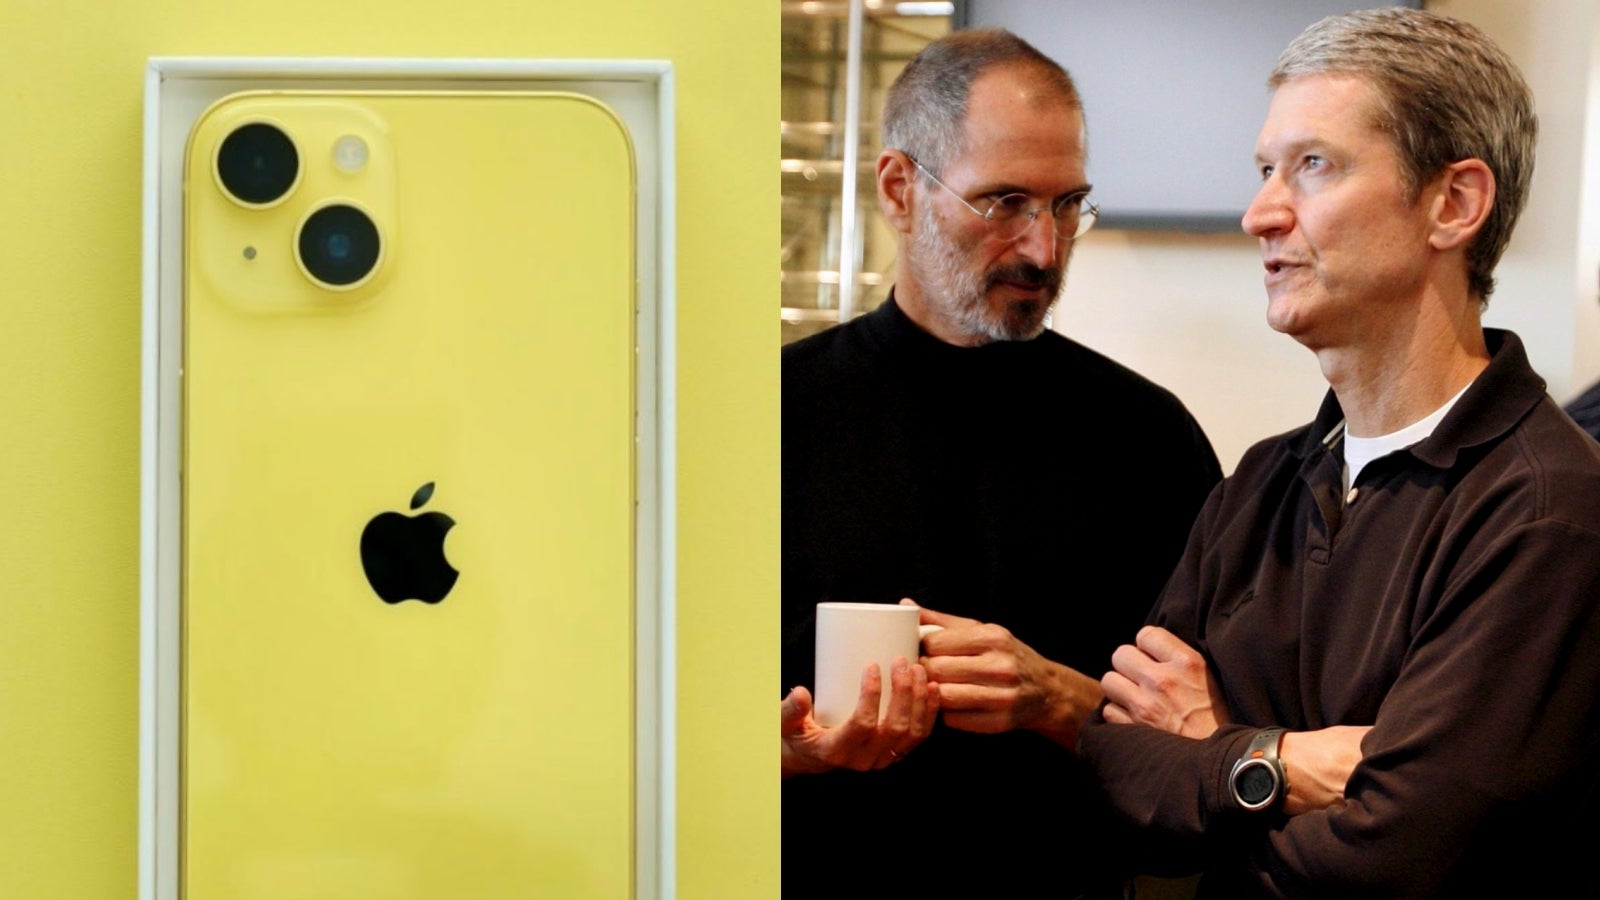 Steve Jobs was a visionary but Tim Cook took Apple to new (economic) heights. - 30 million people bought “the worst iPhone ever”: Apple’s cult-like influence on the phone market